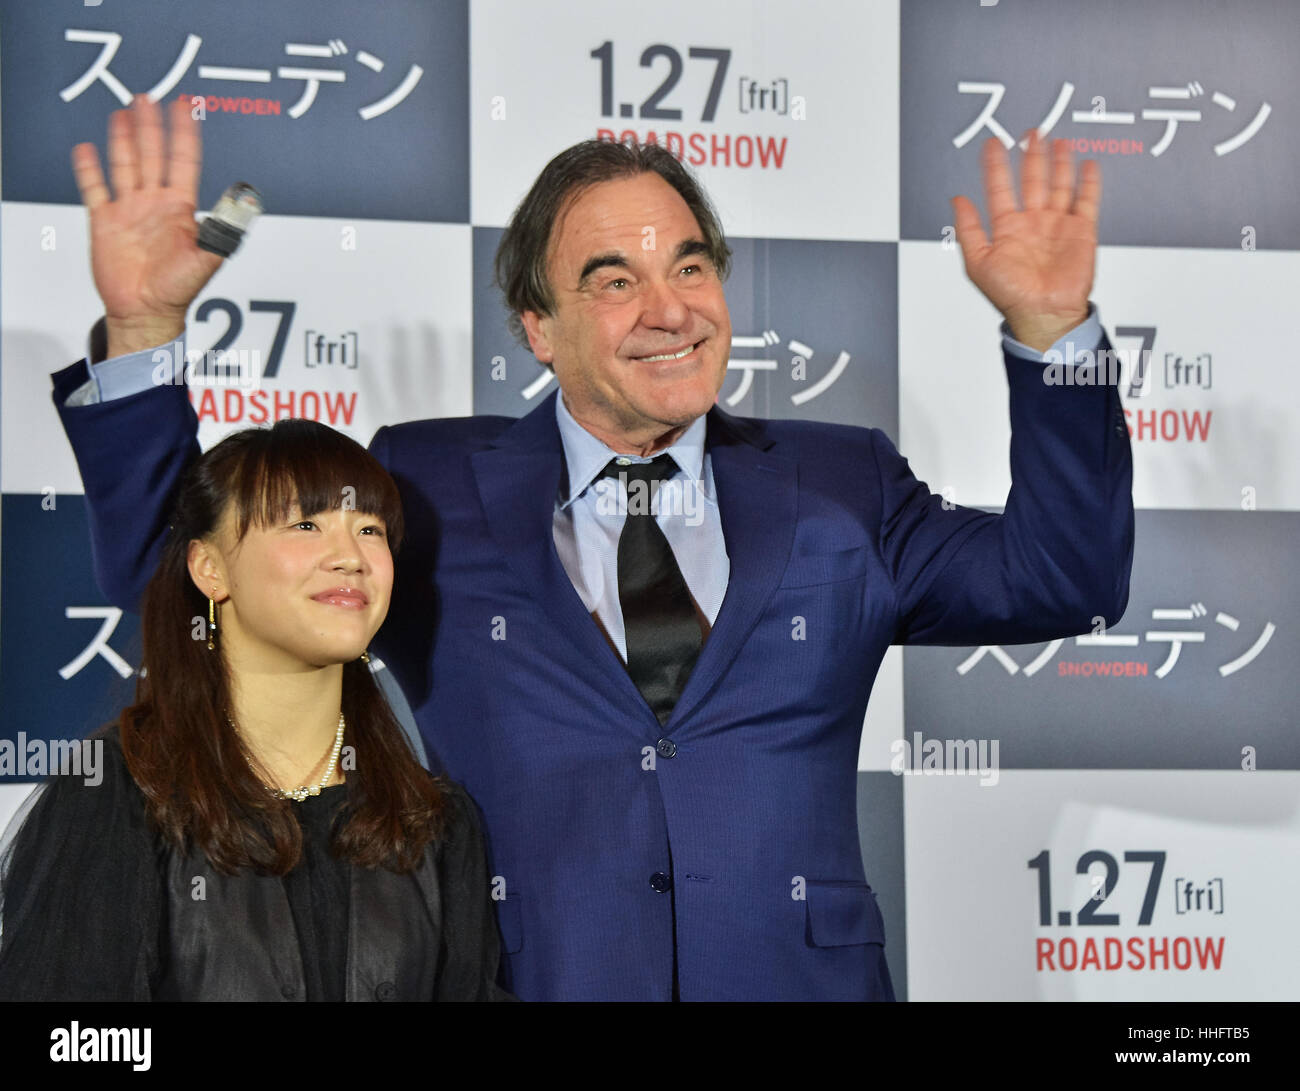 Tokyo, Japan. 18th January 2016. Oliver Stone, January 18, 2017 : Director Oliver Stone(R) and Rio 2016 Olympic Women's Wrestling Freestyle 48kg gold medalist Eri Tosaka attend the Japan Premiere for 'Snowden' at Roppongi Hills in Tokyo, Japan on January 18, 2017. Credit: Aflo Co. Ltd./Alamy Live News Stock Photo